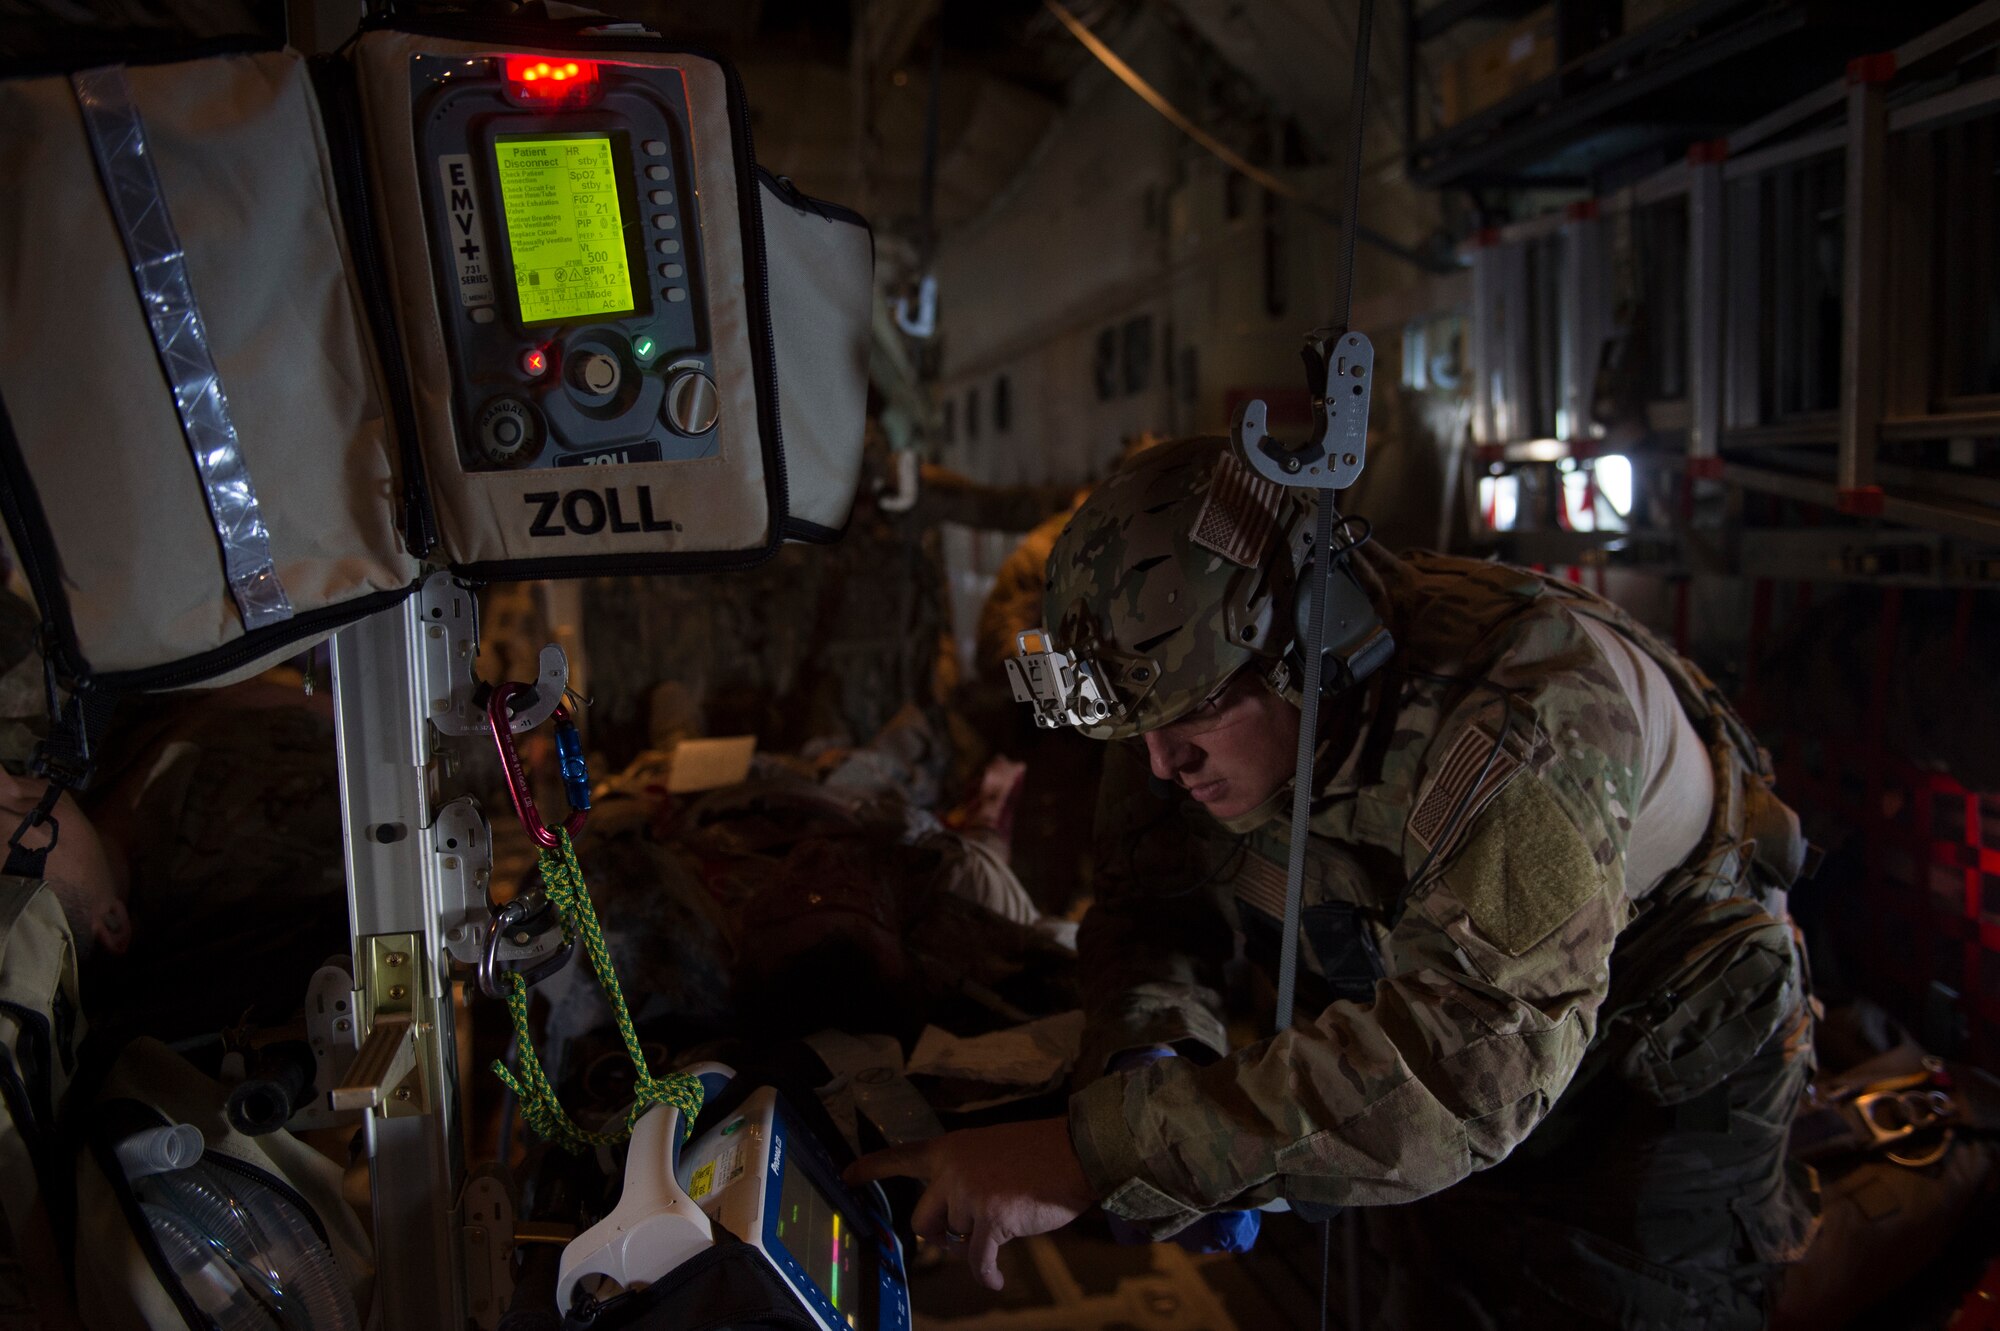 A pararescueman from the 58th Rescue Squadron, Nellis Air Force Base, Nev., provides care to a simulated casualty during Tiger Rescue IV, March 27, 2018, at Vandenberg Air Force Base, Calif. The four-day exercise challenged Airmen from multiple rescue squadrons to bring the capabilities of the personnel recovery triad together to successfully complete rescue missions and maintain proficiency. The three branches of the personnel recovery triad are the HC-130J Combat King II, HH-60G Pave Hawk and the guardian angel weapons system or pararescuemen. (U.S. Air Force photo by Senior Airman Janiqua P. Robinson)